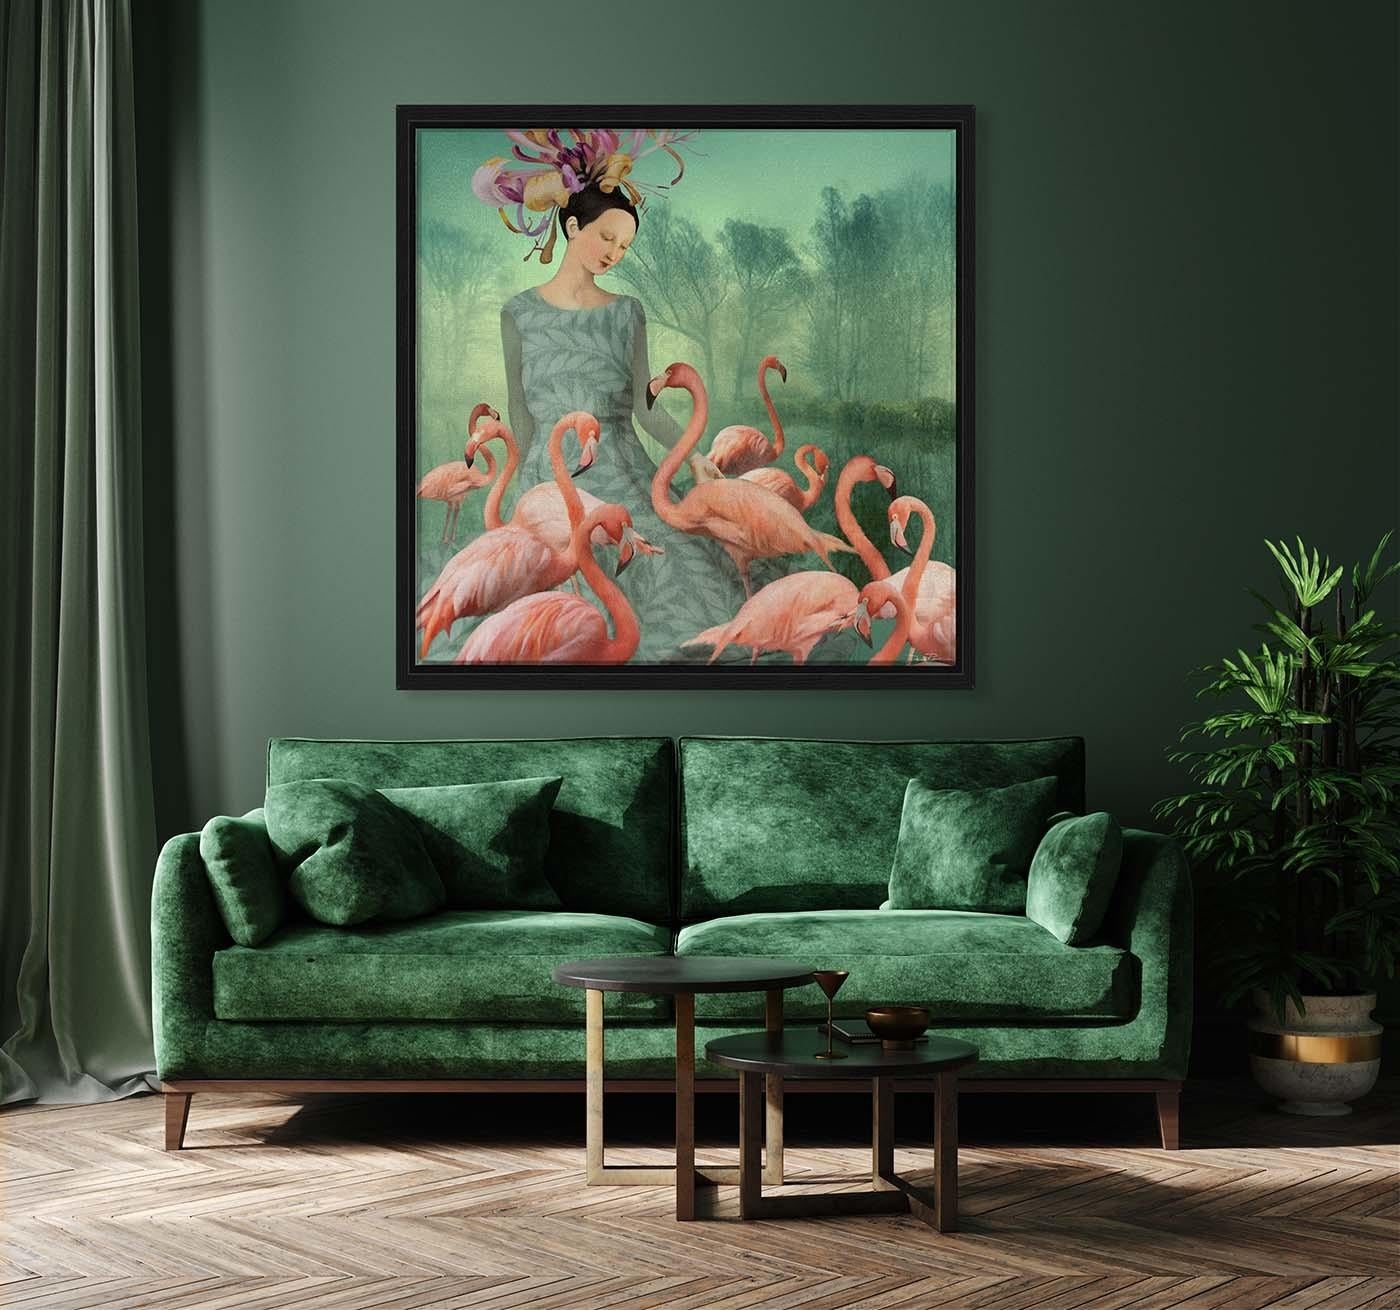 A woman with a flower headdress is immersed in a dreamy atmosphere. The swamp, gray and ashen, is now behind her and she smiles as she caresses dreams of pink flamingos. This limited edition digital piece is made by assembling photographs and